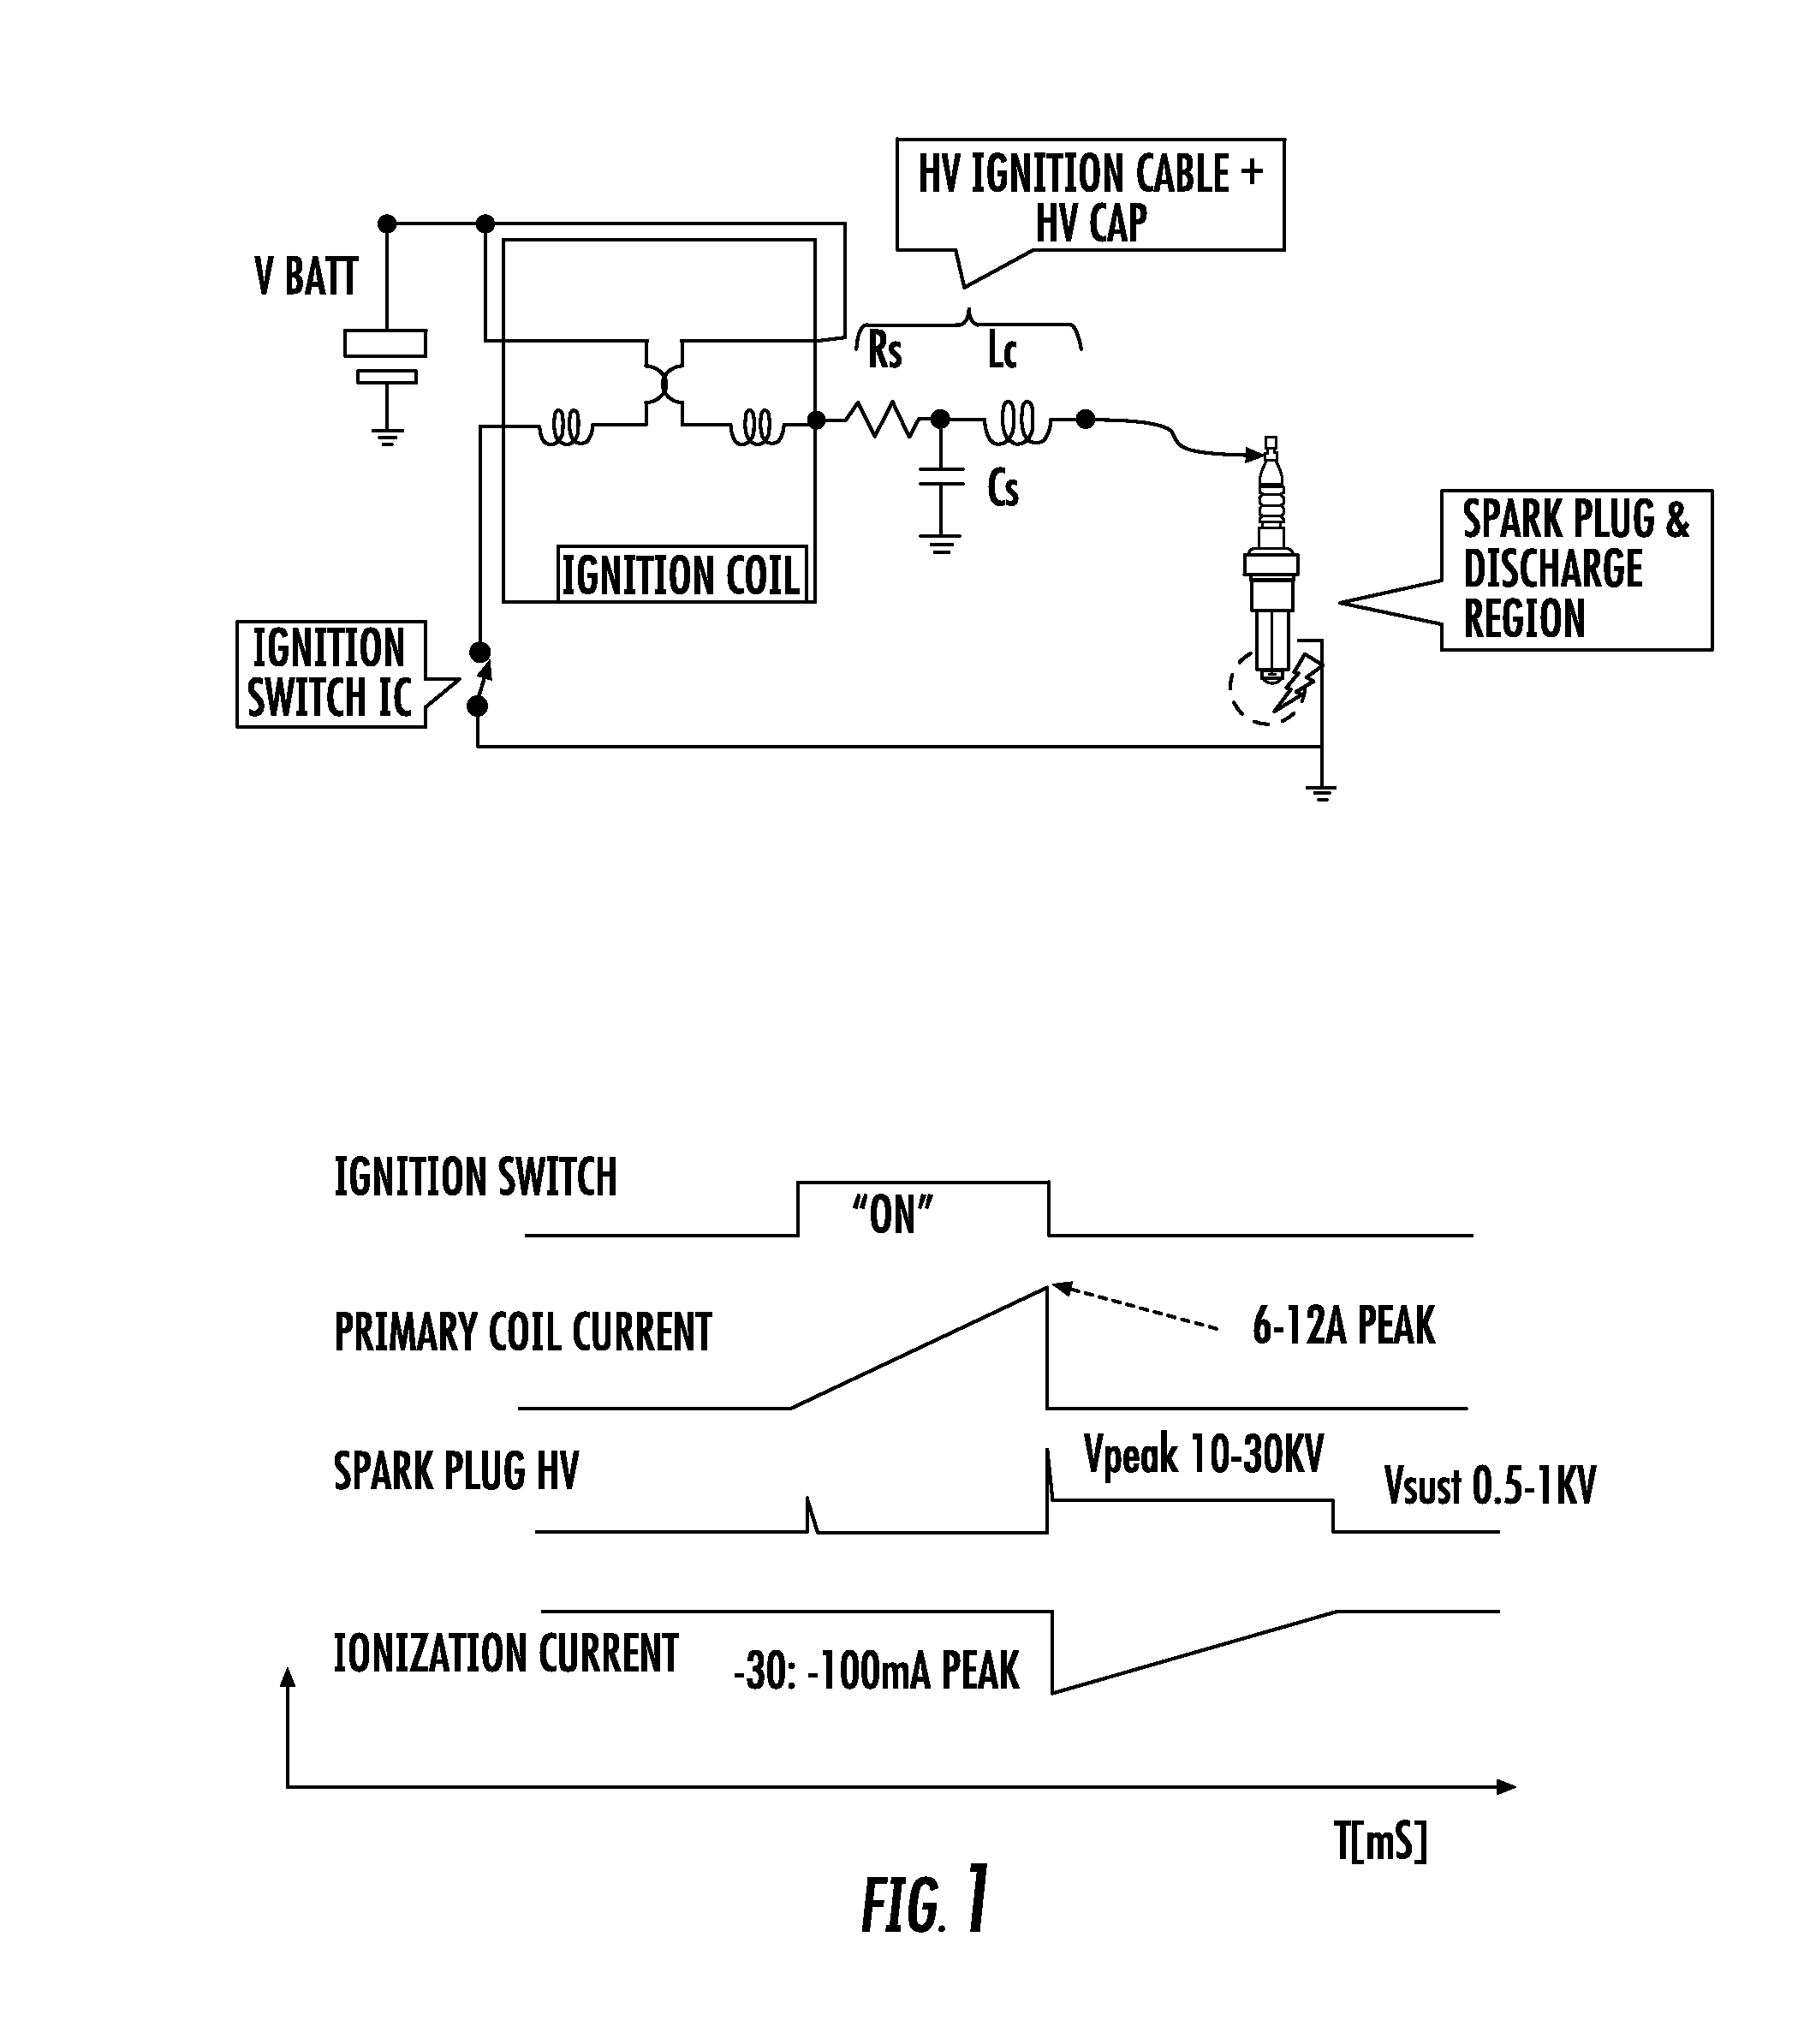 Method and processing system of sensed ionization current data for real time estimation of combustion chamber pressure in a spark ignition engine